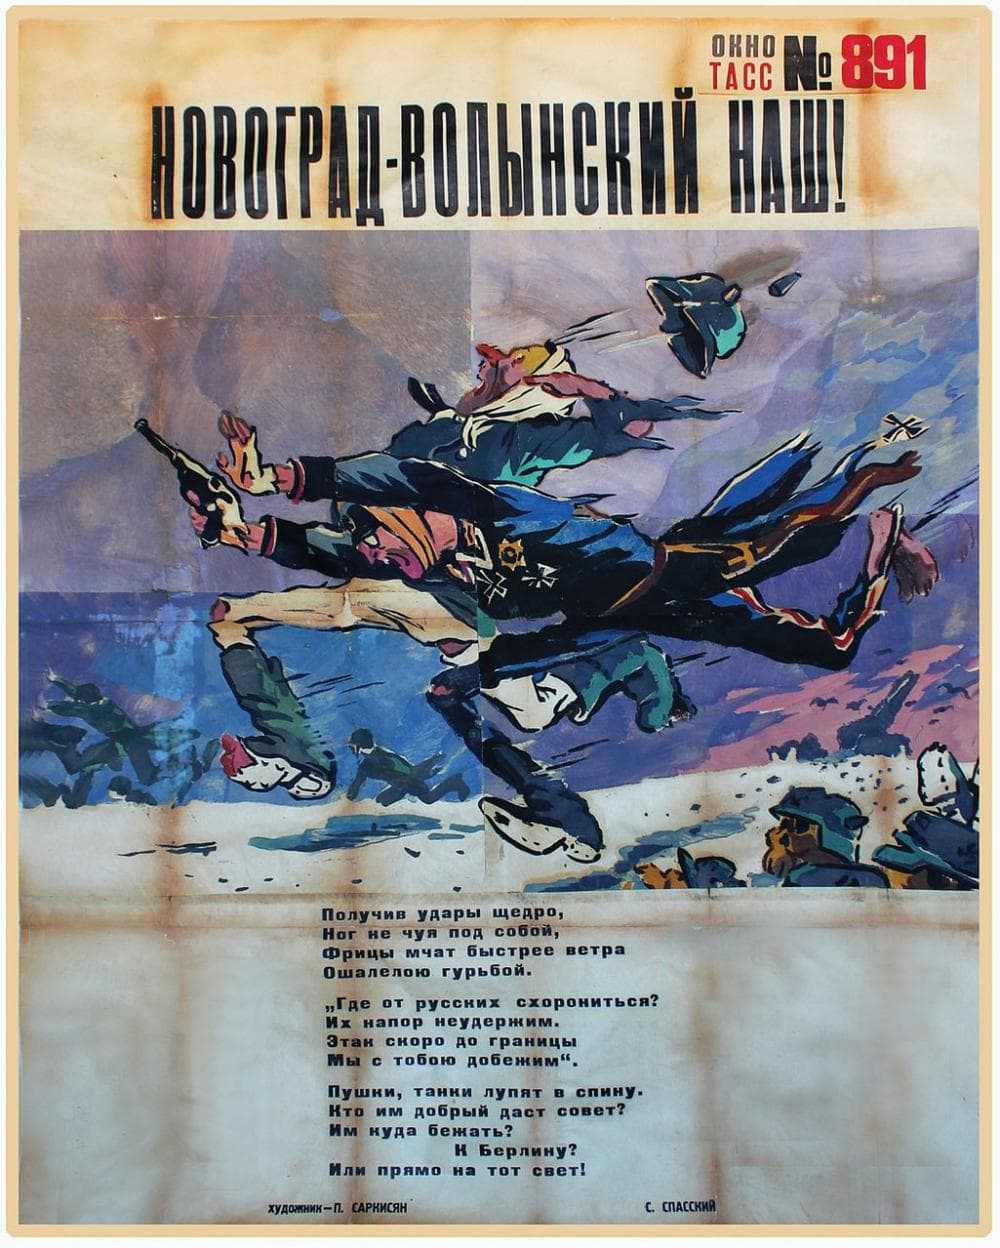 &quot;Novograd-Volynskii is ours!&quot; proclaims Petr Sarkisian's 1944 poster. &quot;Having taken copious blows, their legs no longer obeying them, the Fritzes go mad en masse and whirl away faster than the wind. ... Where should they run? To Berlin? Or straight to the grave?&quot; (Courtesy of International Poster Gallery)